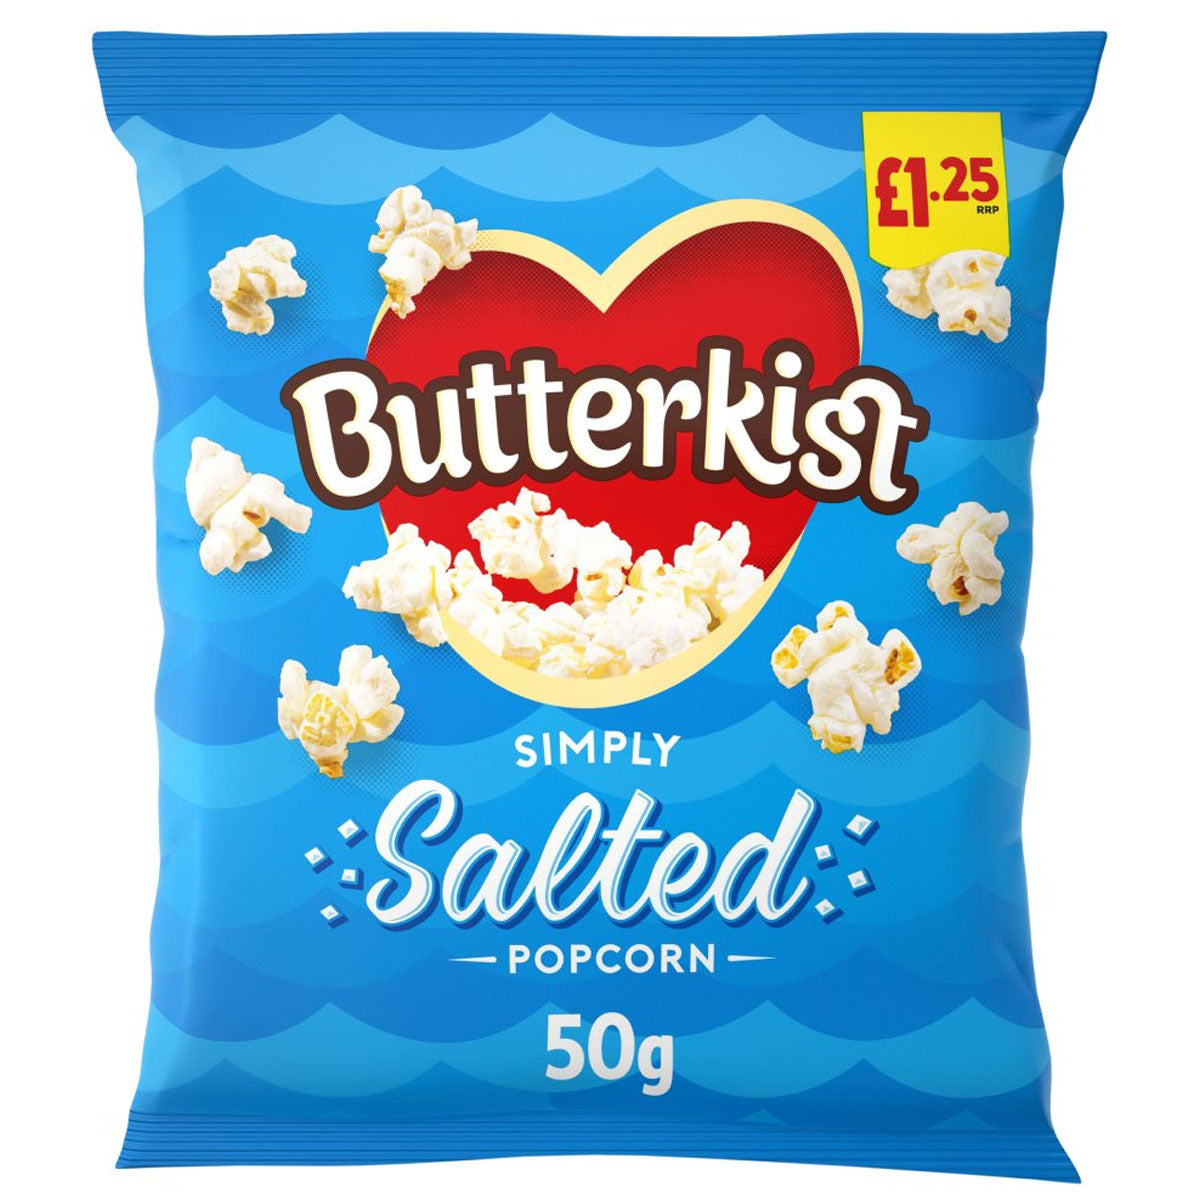 Butterkist - Simply Salted Popcorn - 50g - Continental Food Store